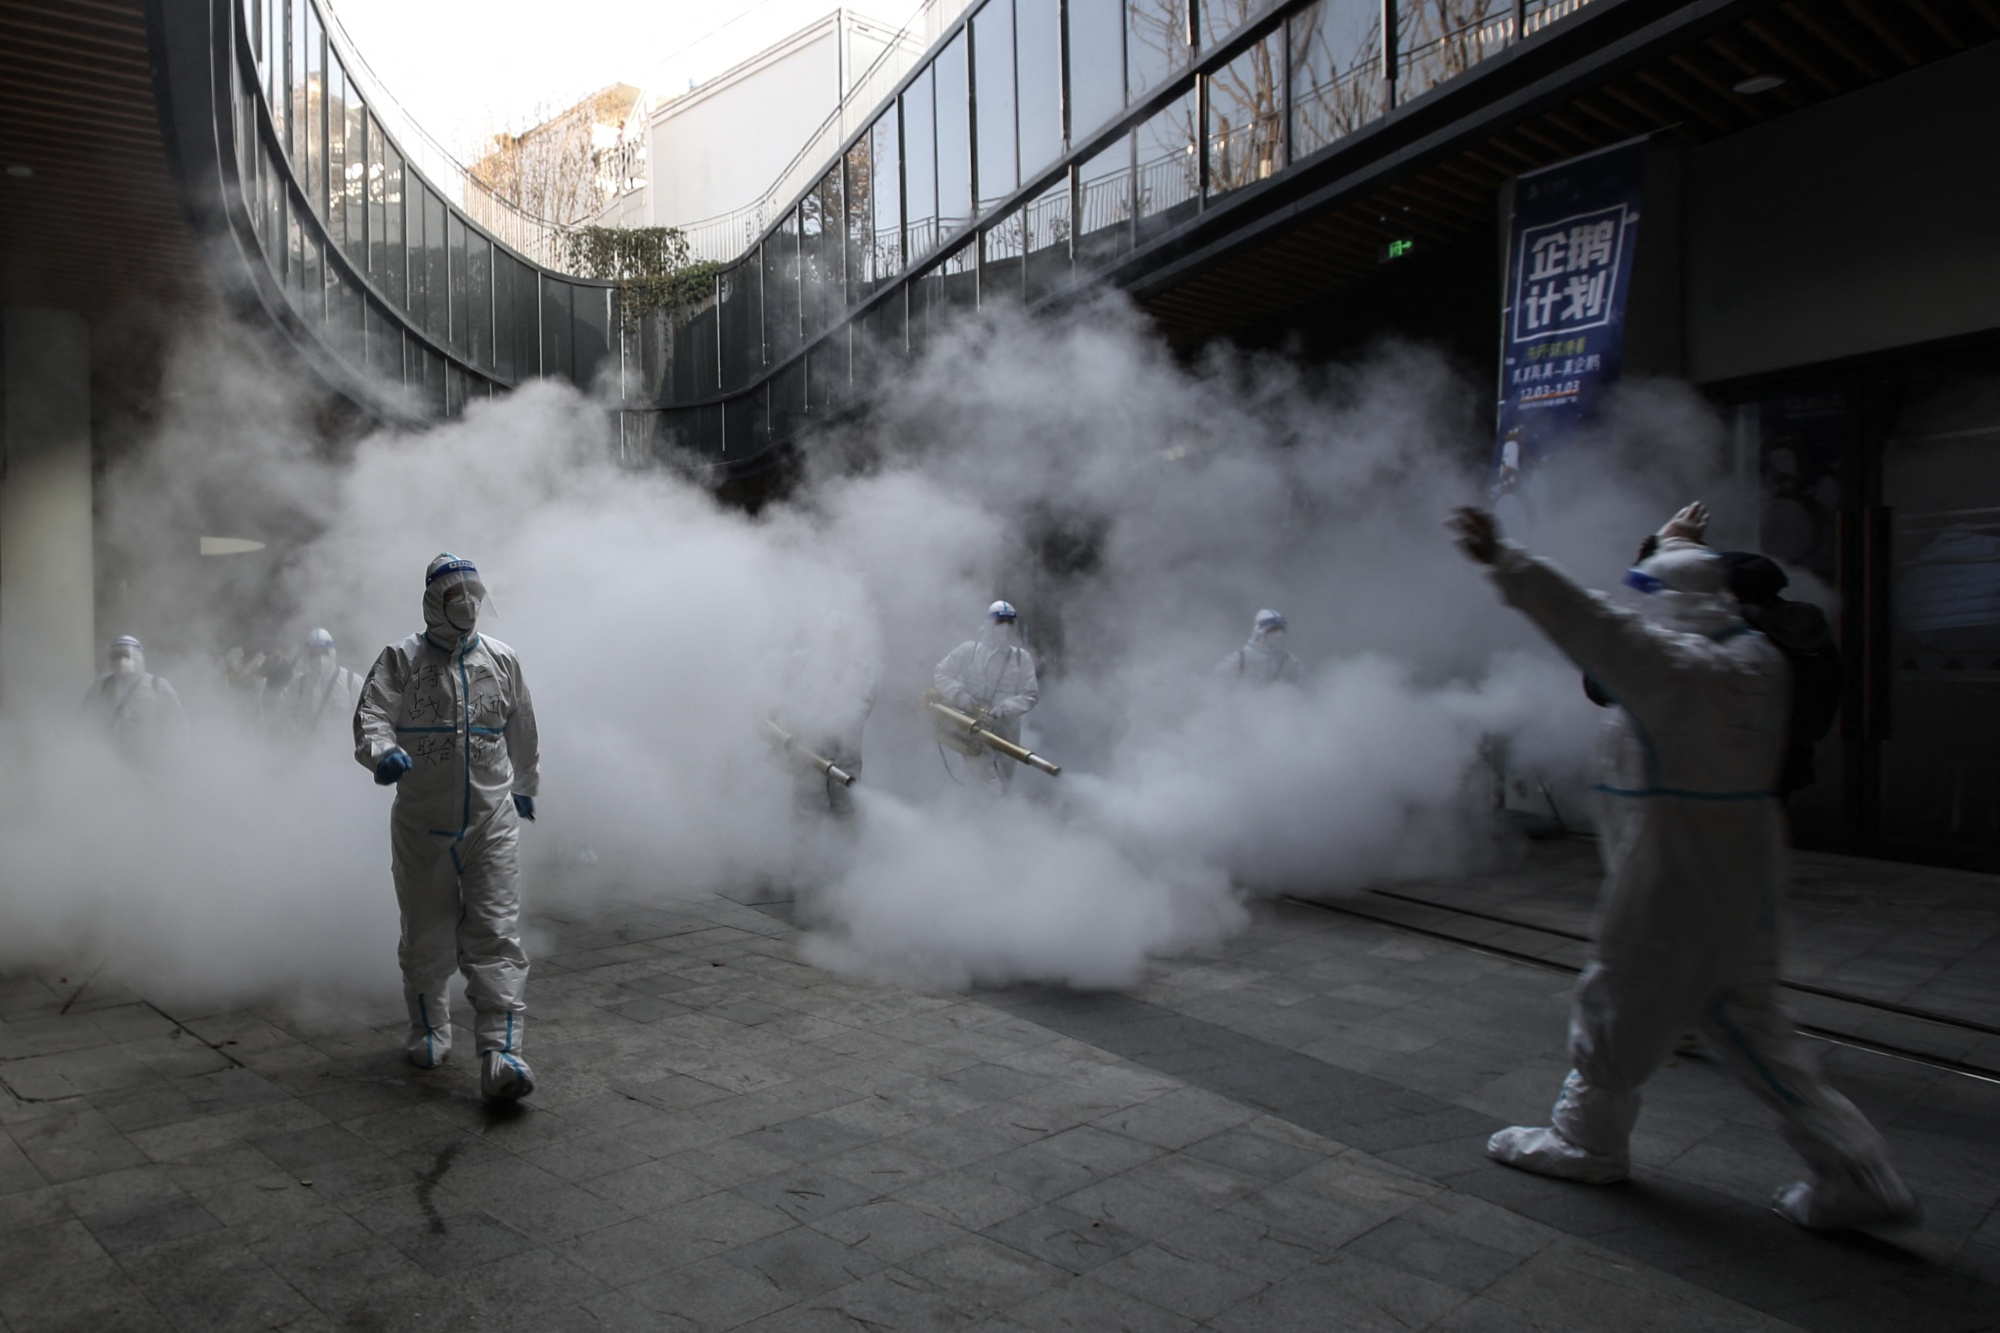 Health workers spray disinfectant outside a shopping mall in Xi'an on Jan. 12.